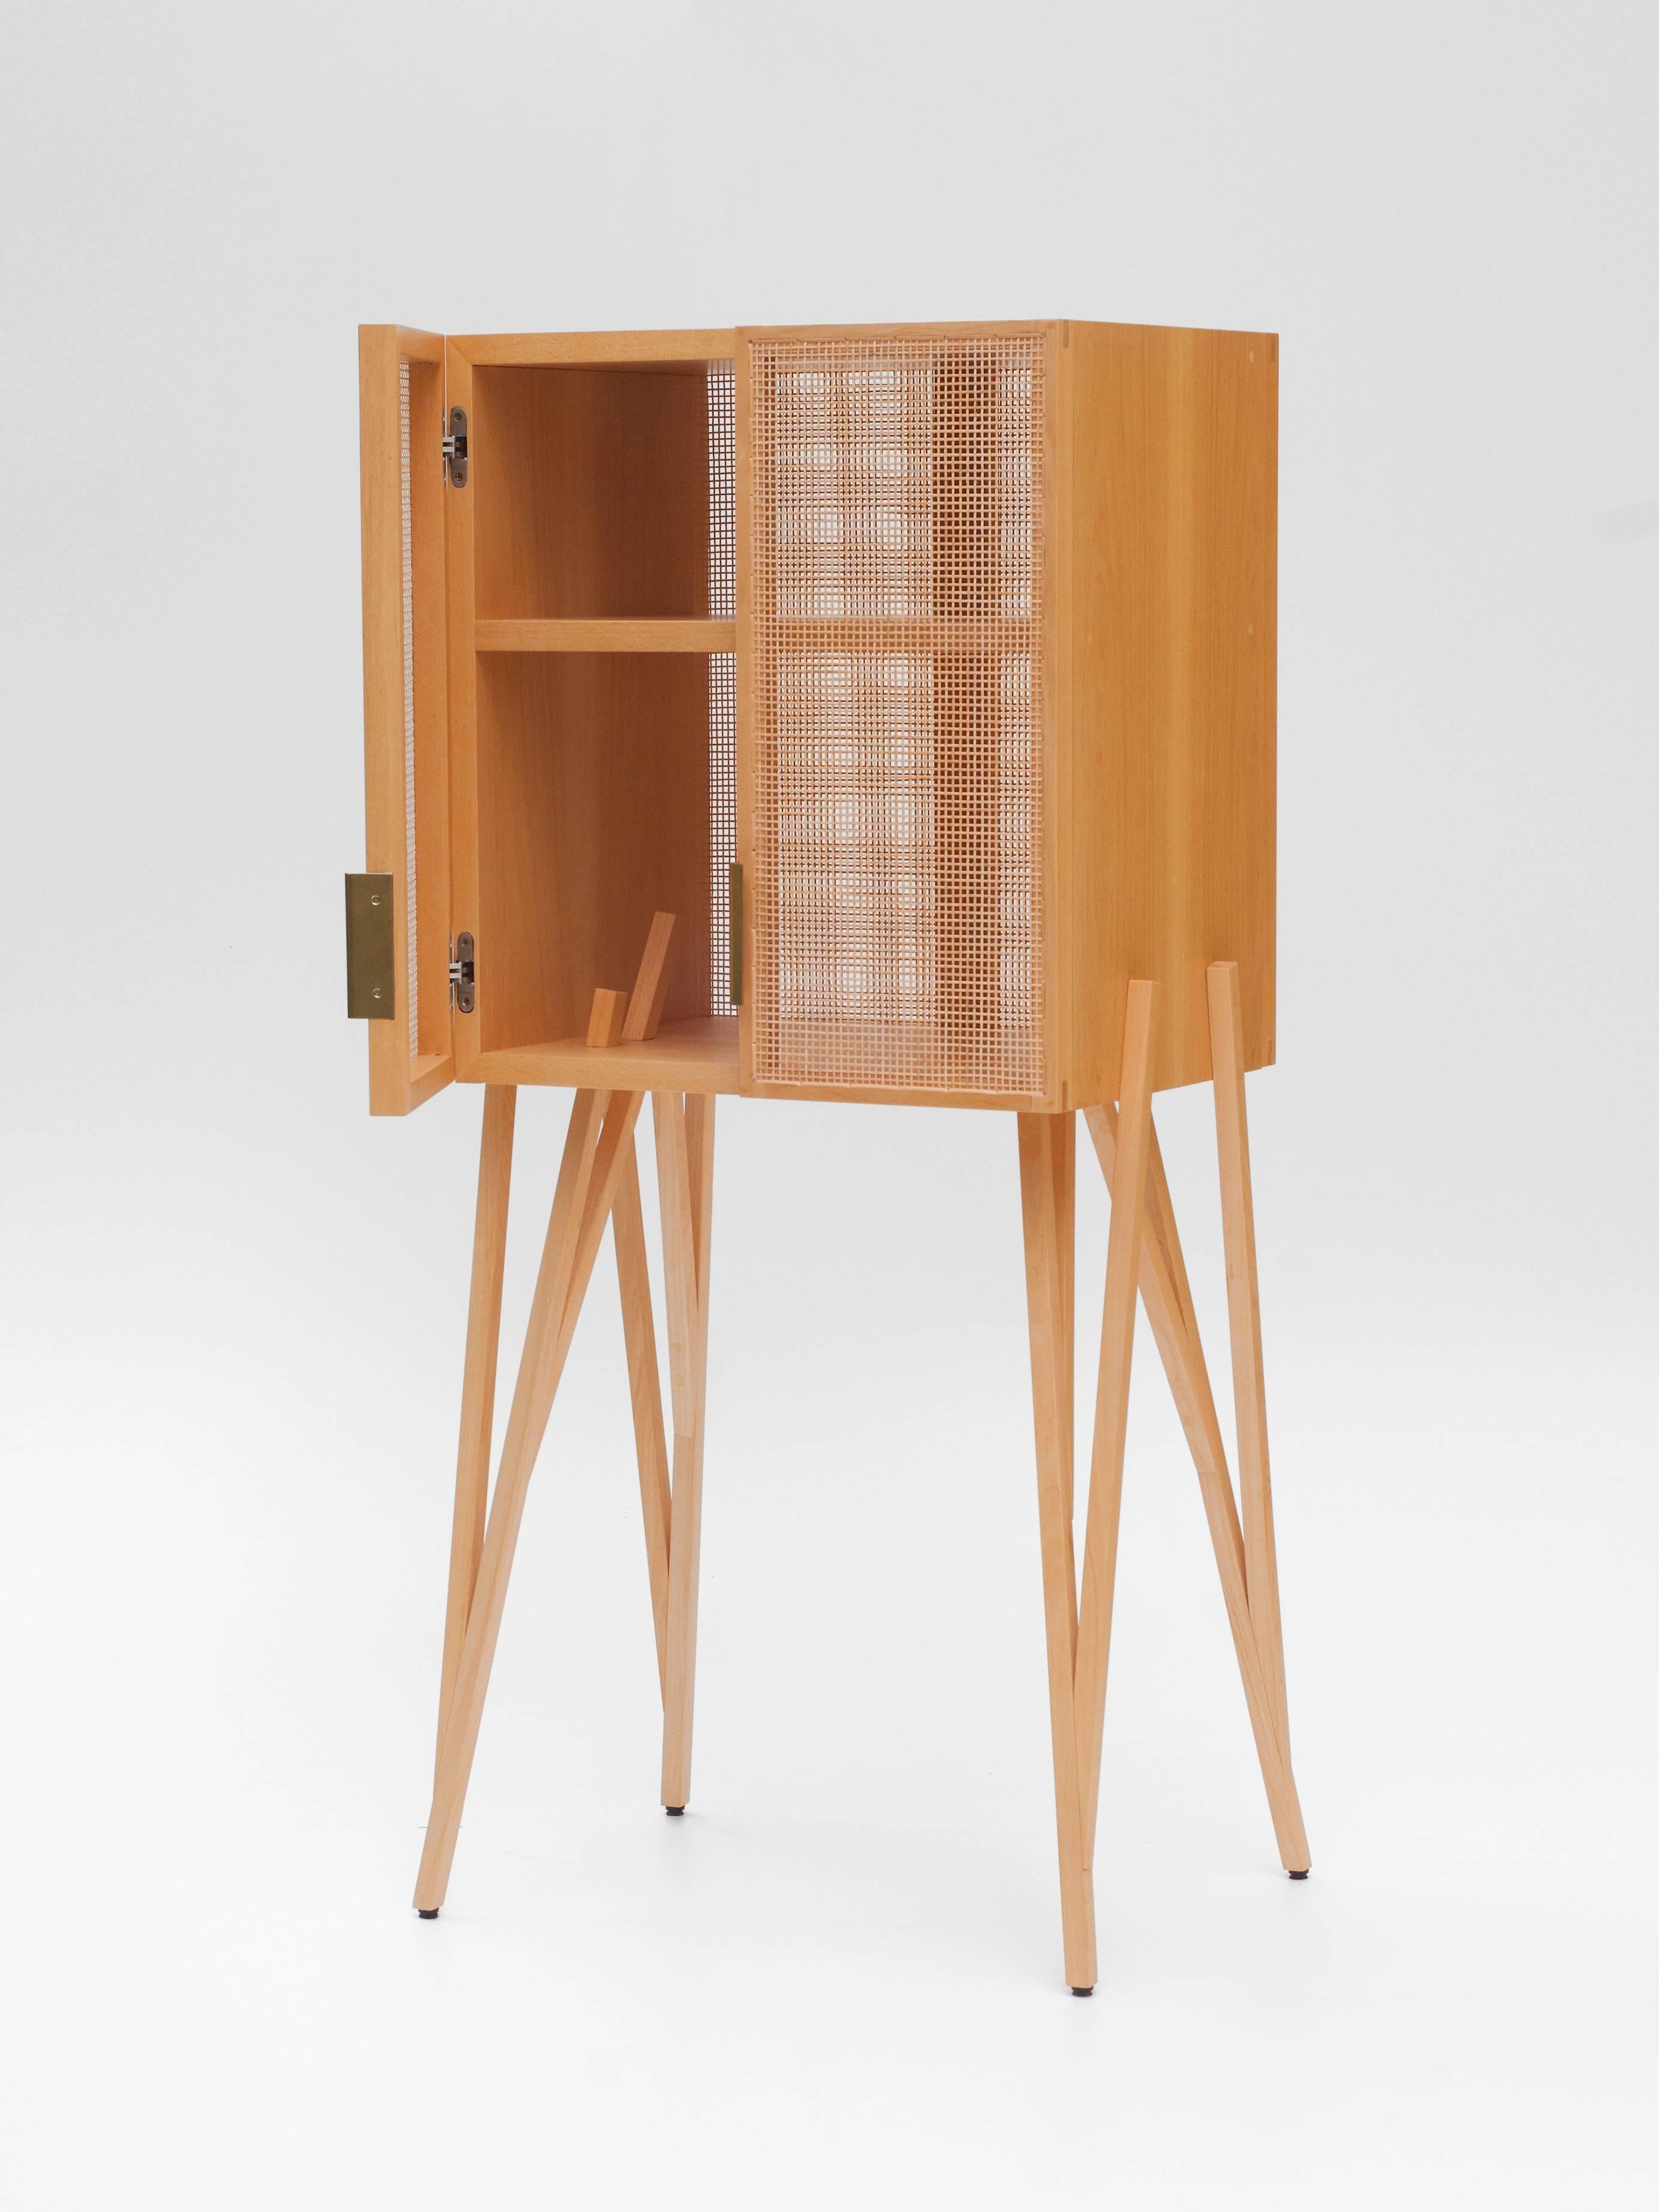 Brazilian Bar in Marfim Wood  by Paulo Alves, Handcrafted in Brazil For Sale